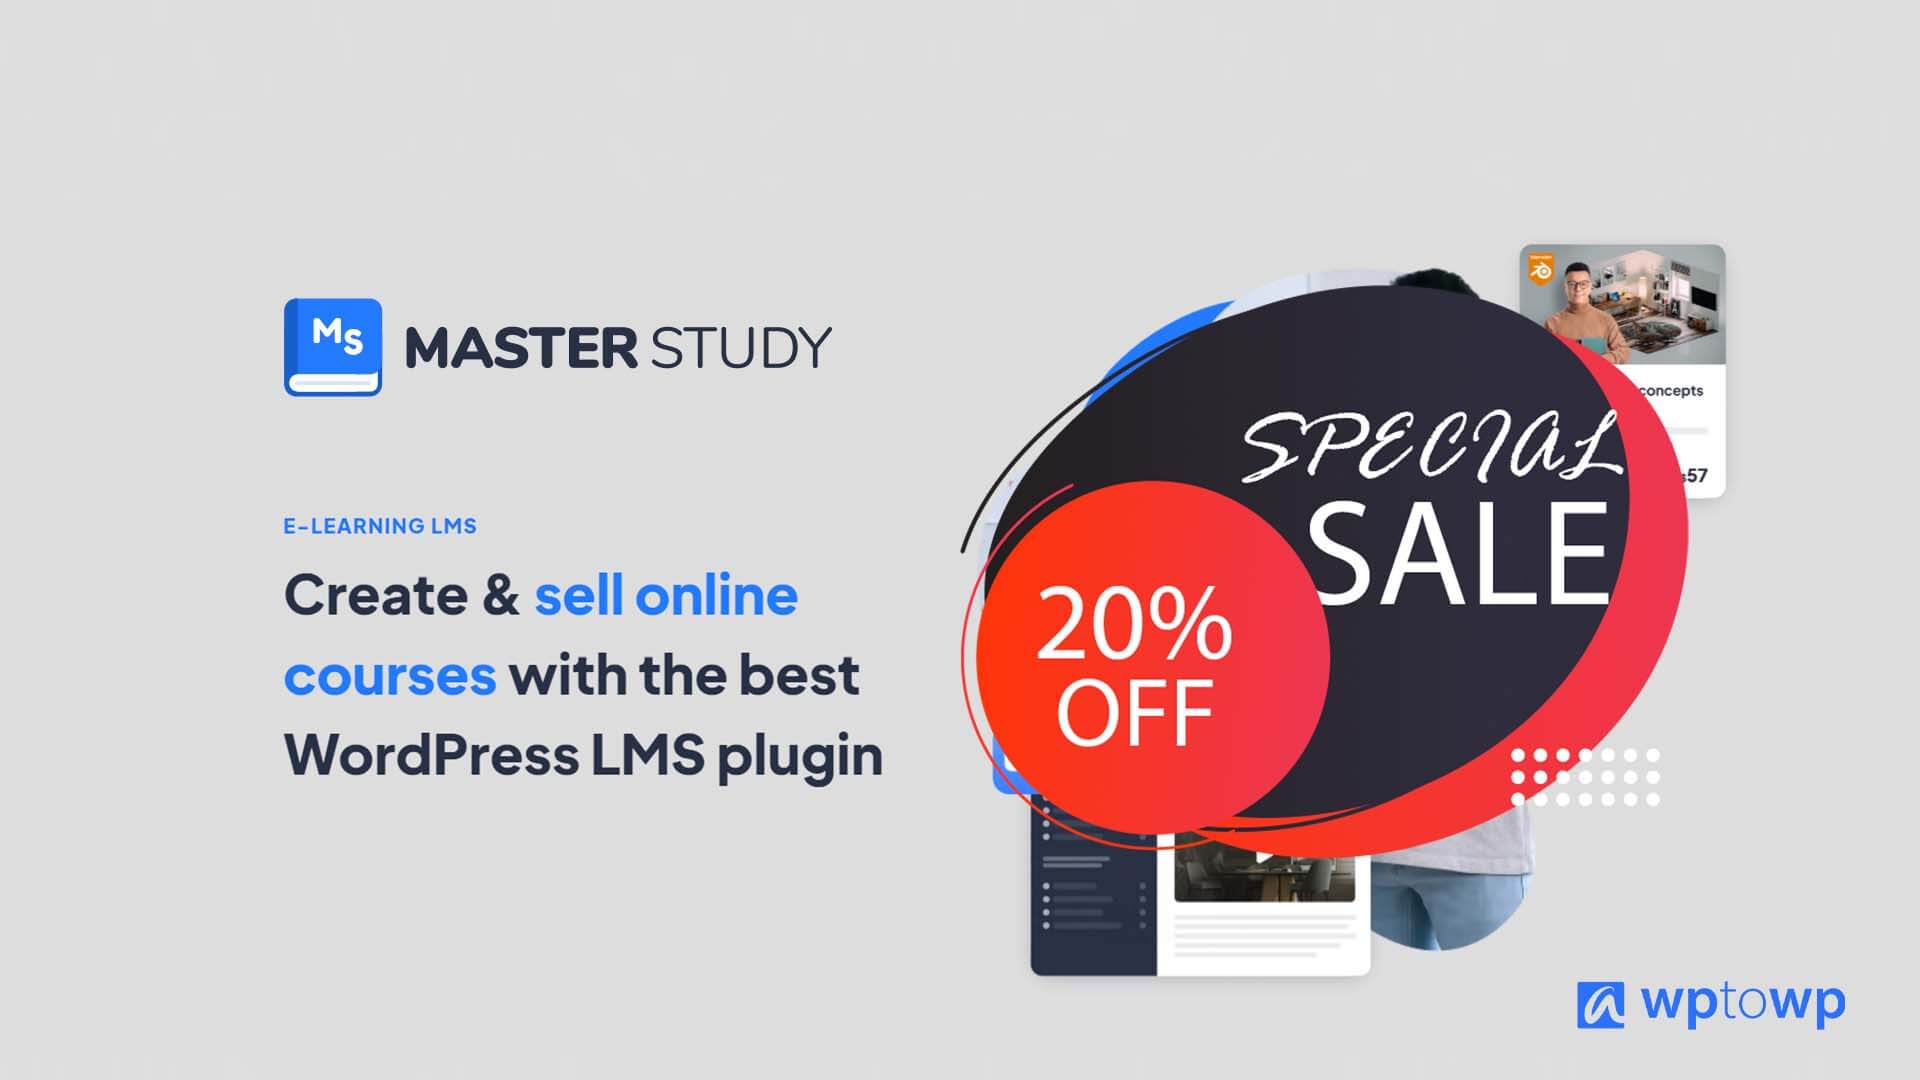 MasterStudy LMS coupon code, Wptowp